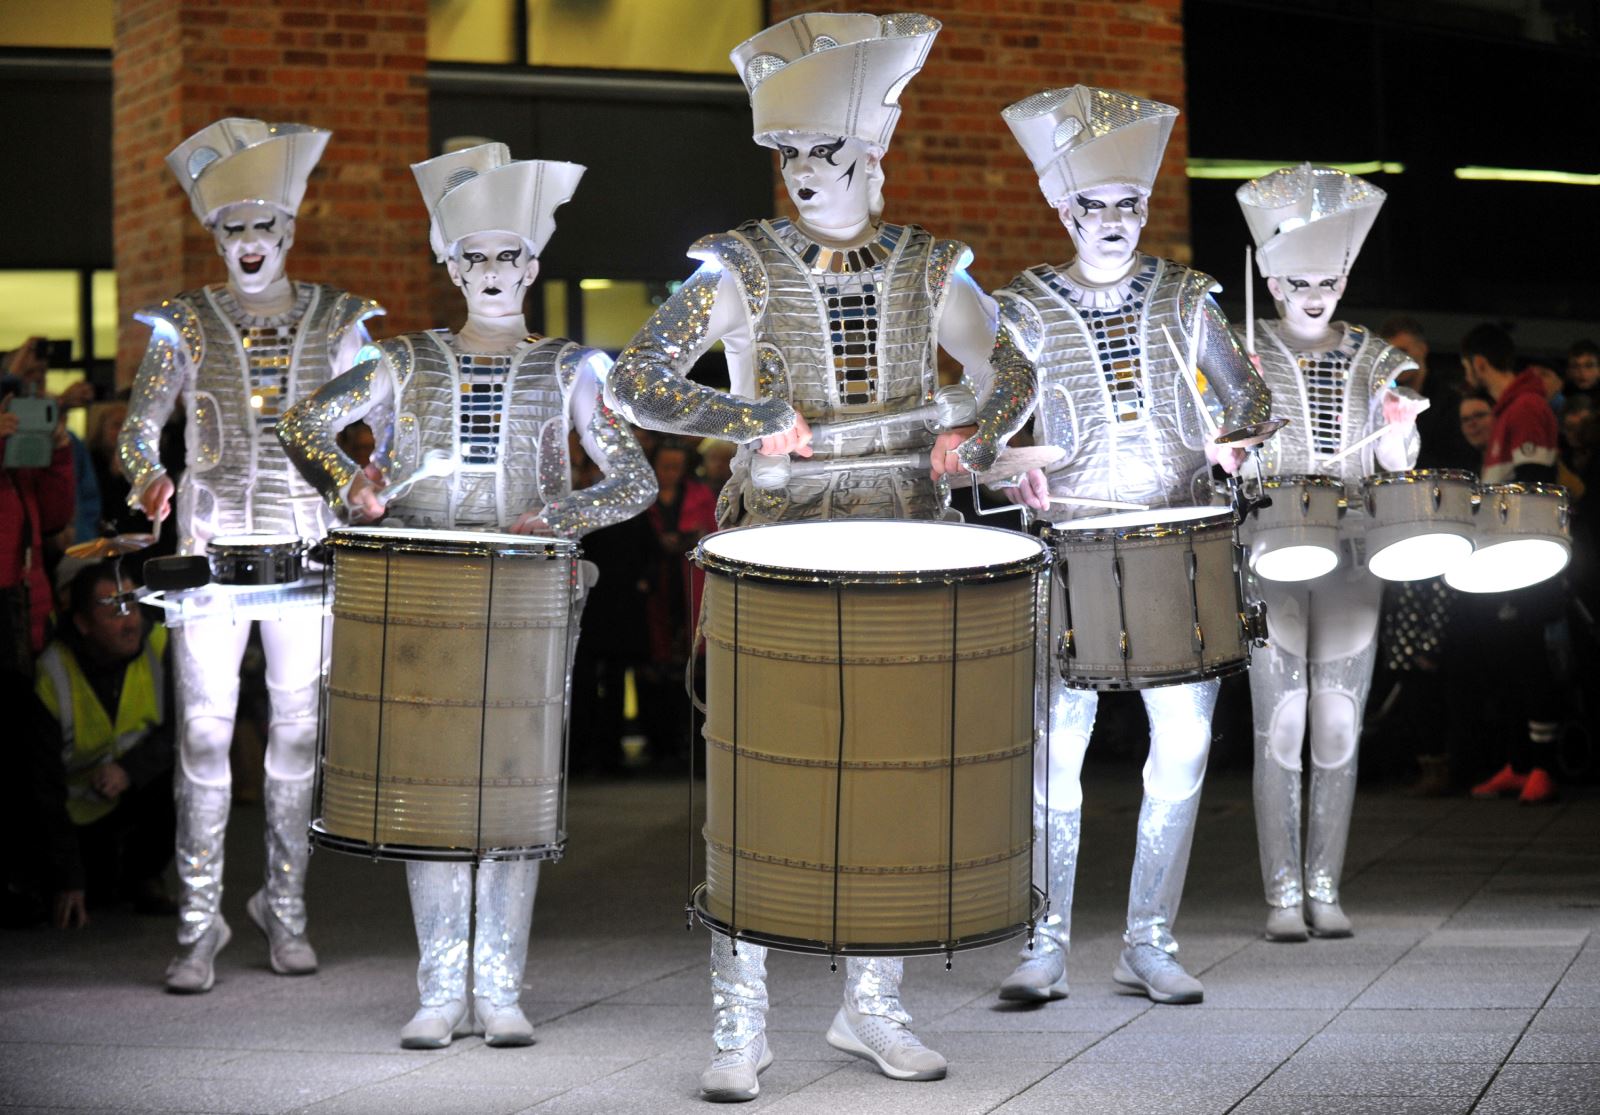 Spark! street performers illuminated with drums in Cheltenham